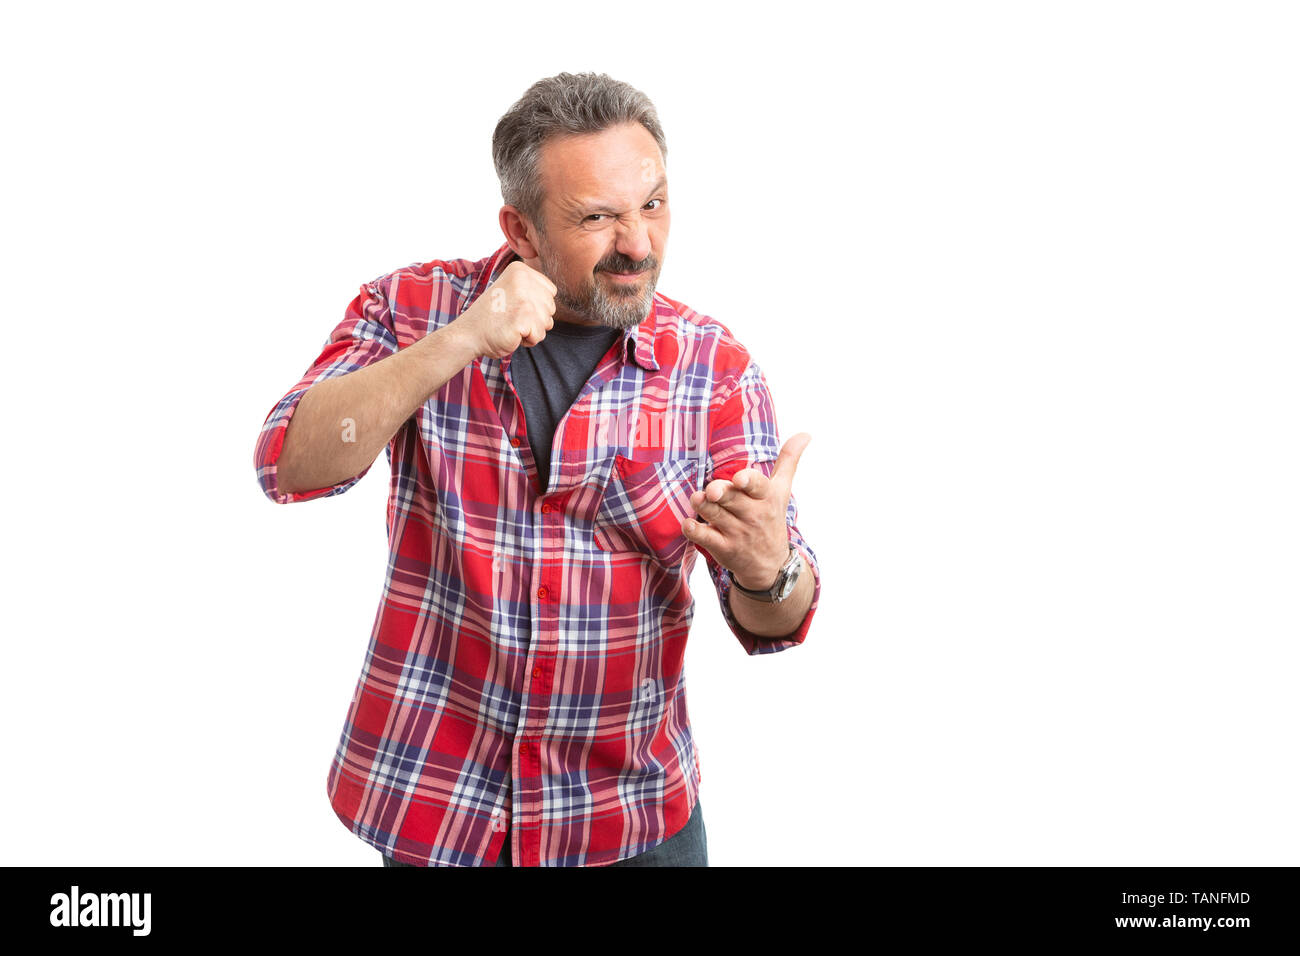 Angry man threatening by making gesture with fist and palm isolated on white studio background Stock Photo